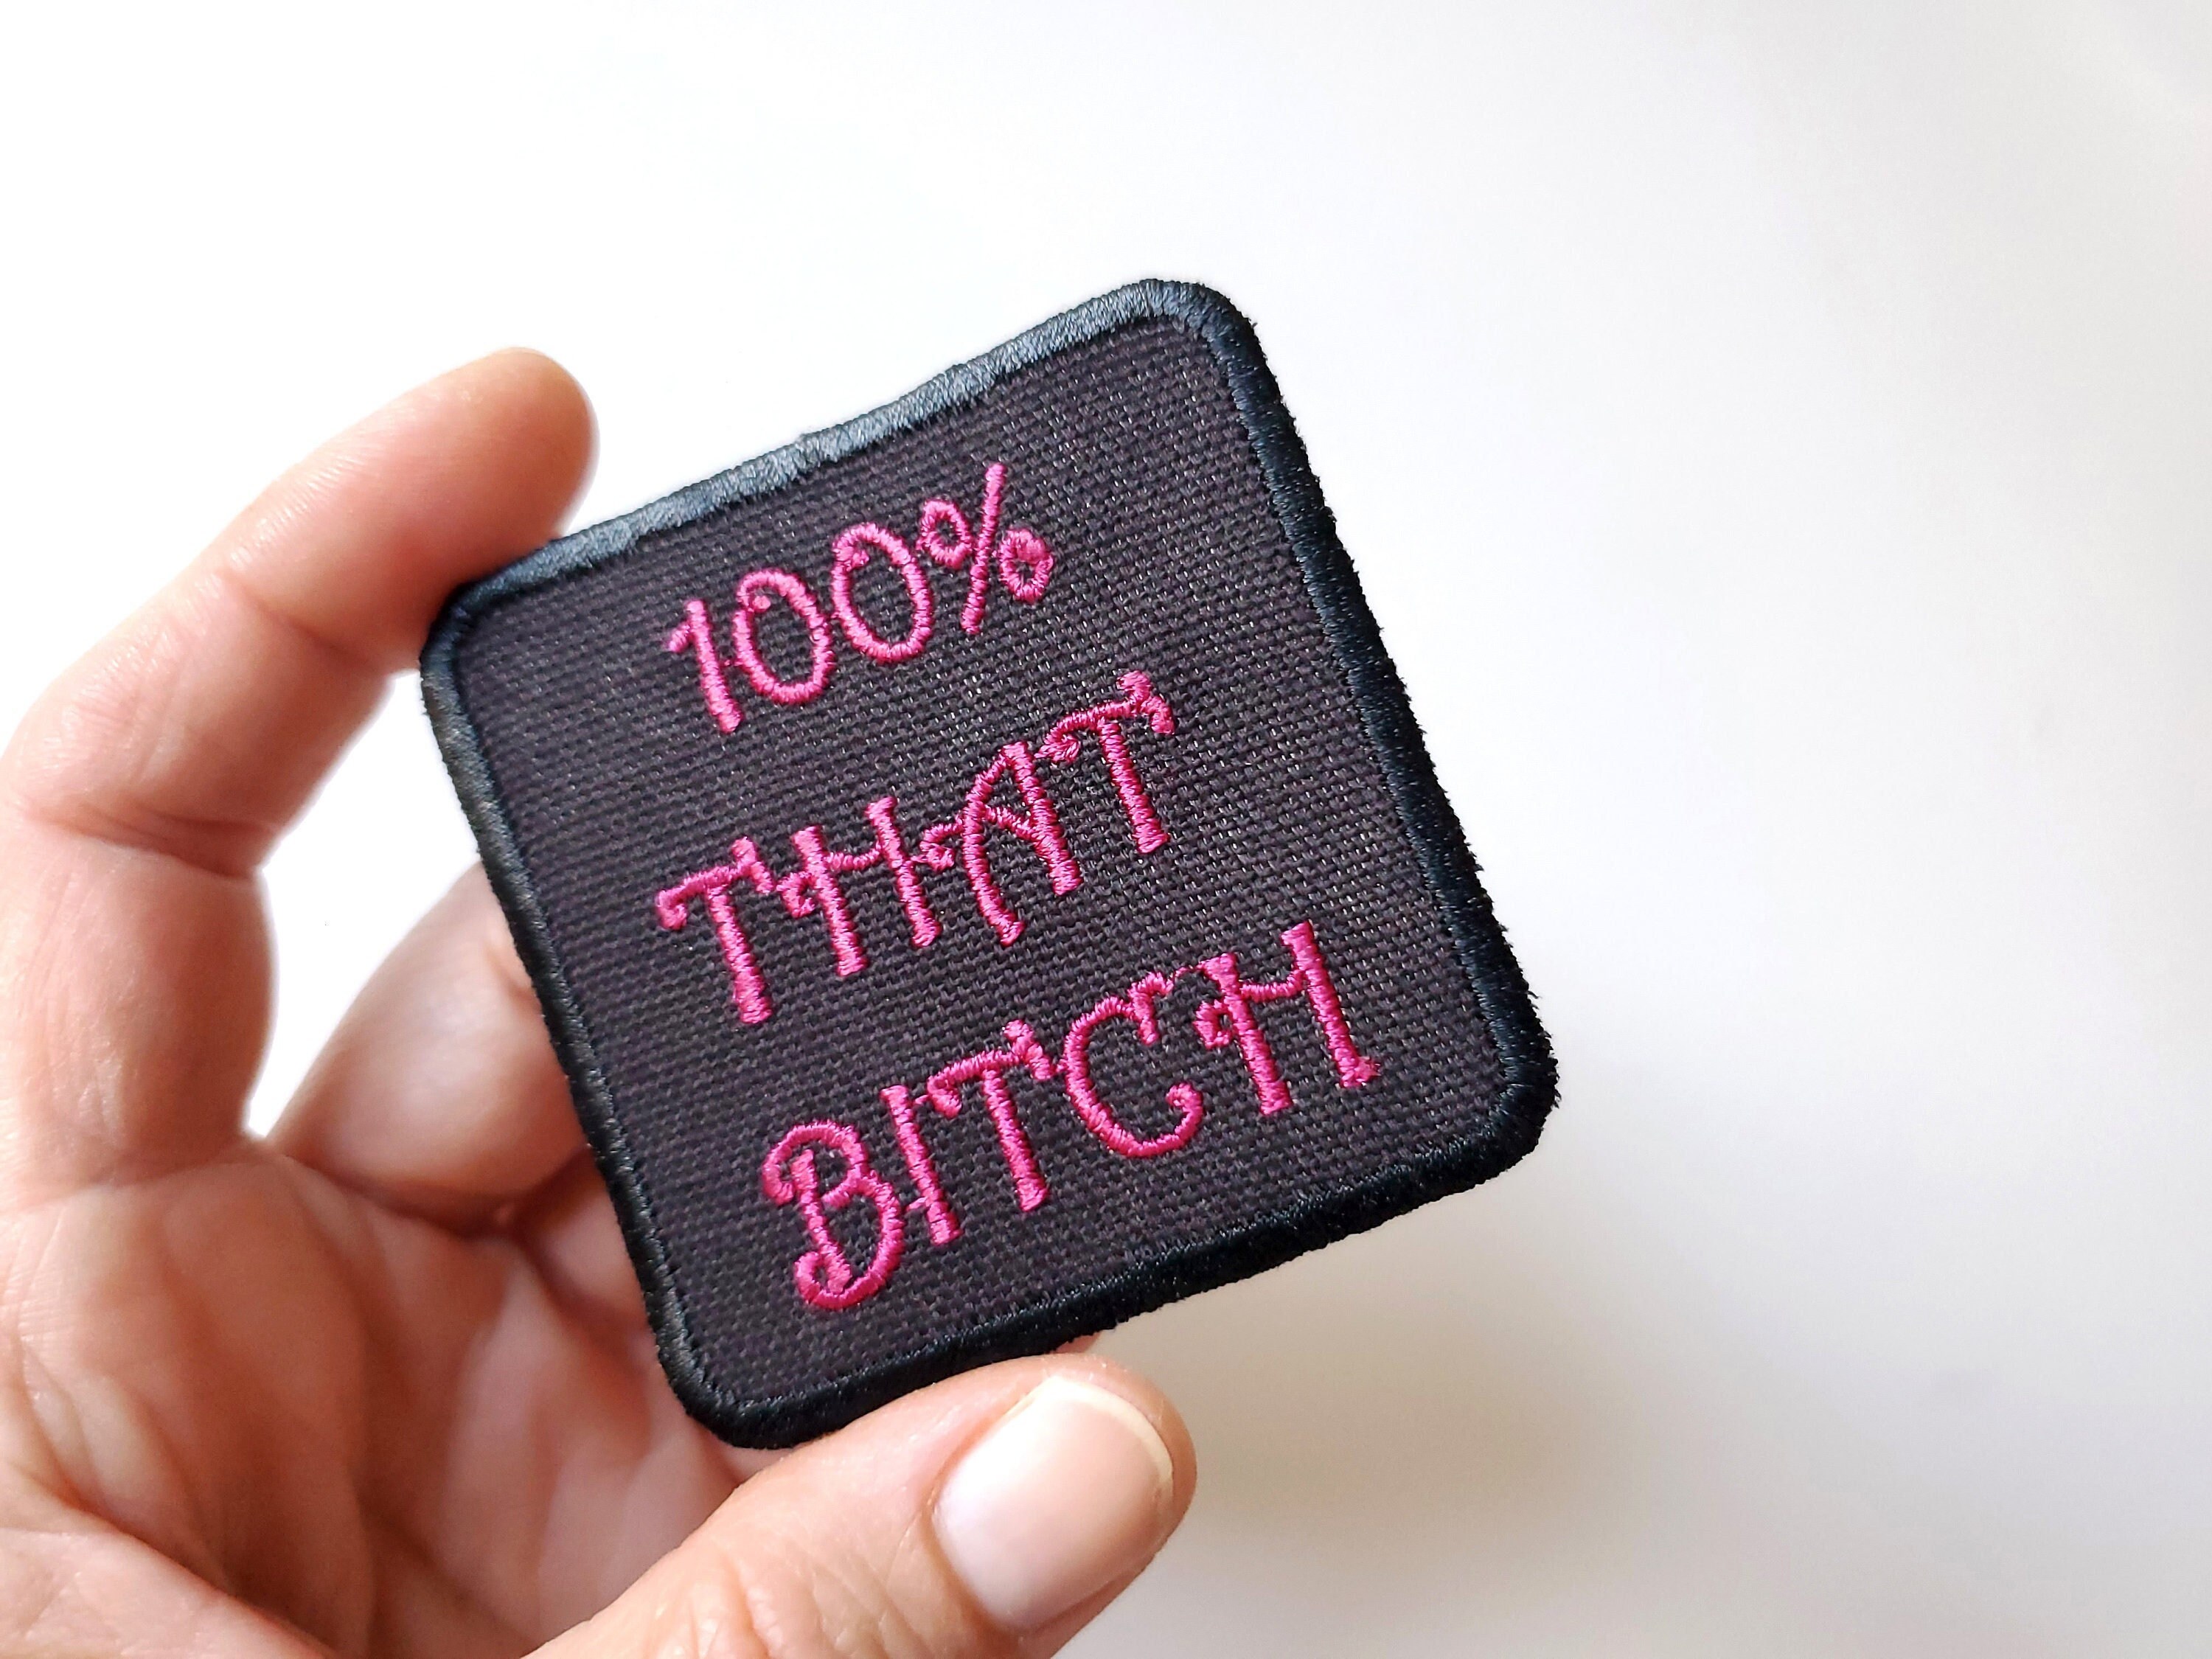 CRAZY BITCH Patch Embroidered Iron-on Applique Biker Funny